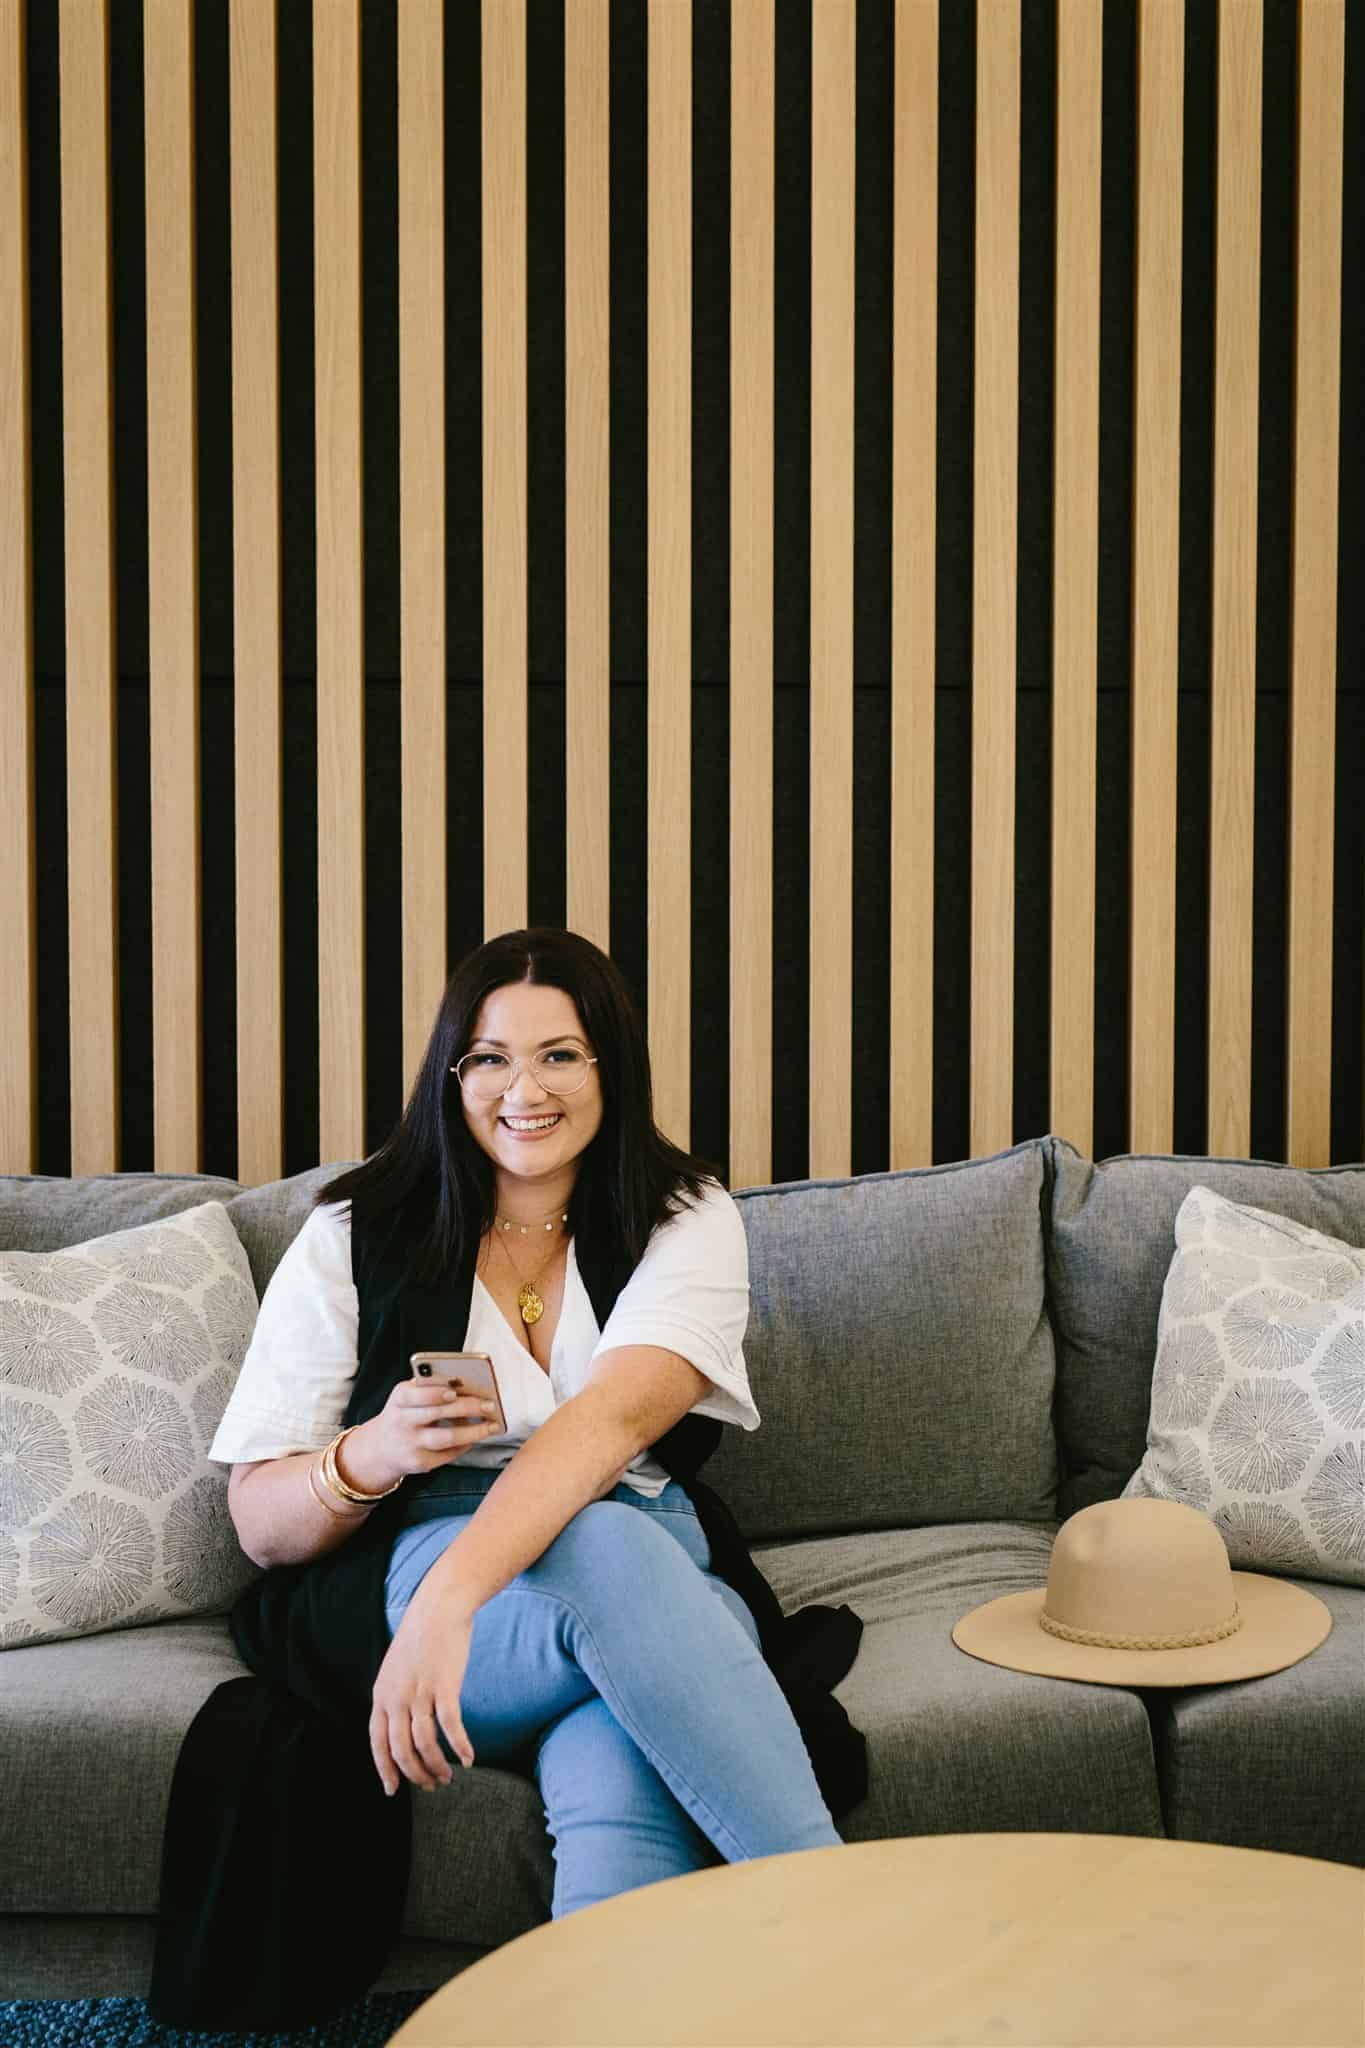 A woman relaxing on a couch in front of a striped wall for Gold Coast brand design.